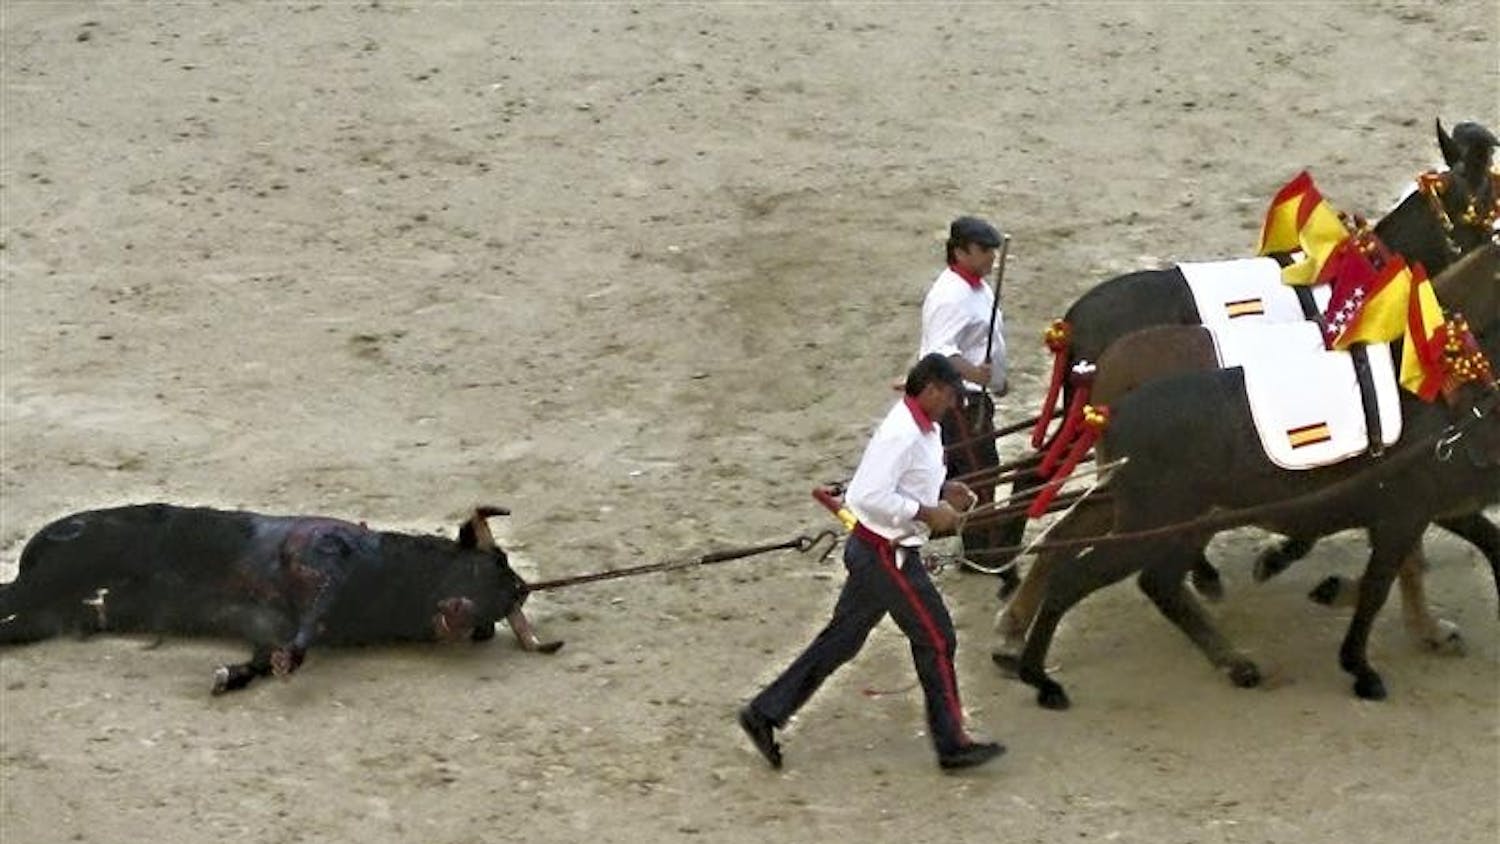 Costumed horses drag the corpse of a bull out of the Plaza de Toros on Sunday in Madrid. The bullfight marks the end of the Festival of San Isidro, a 14-day lineup of nightly bullfights.